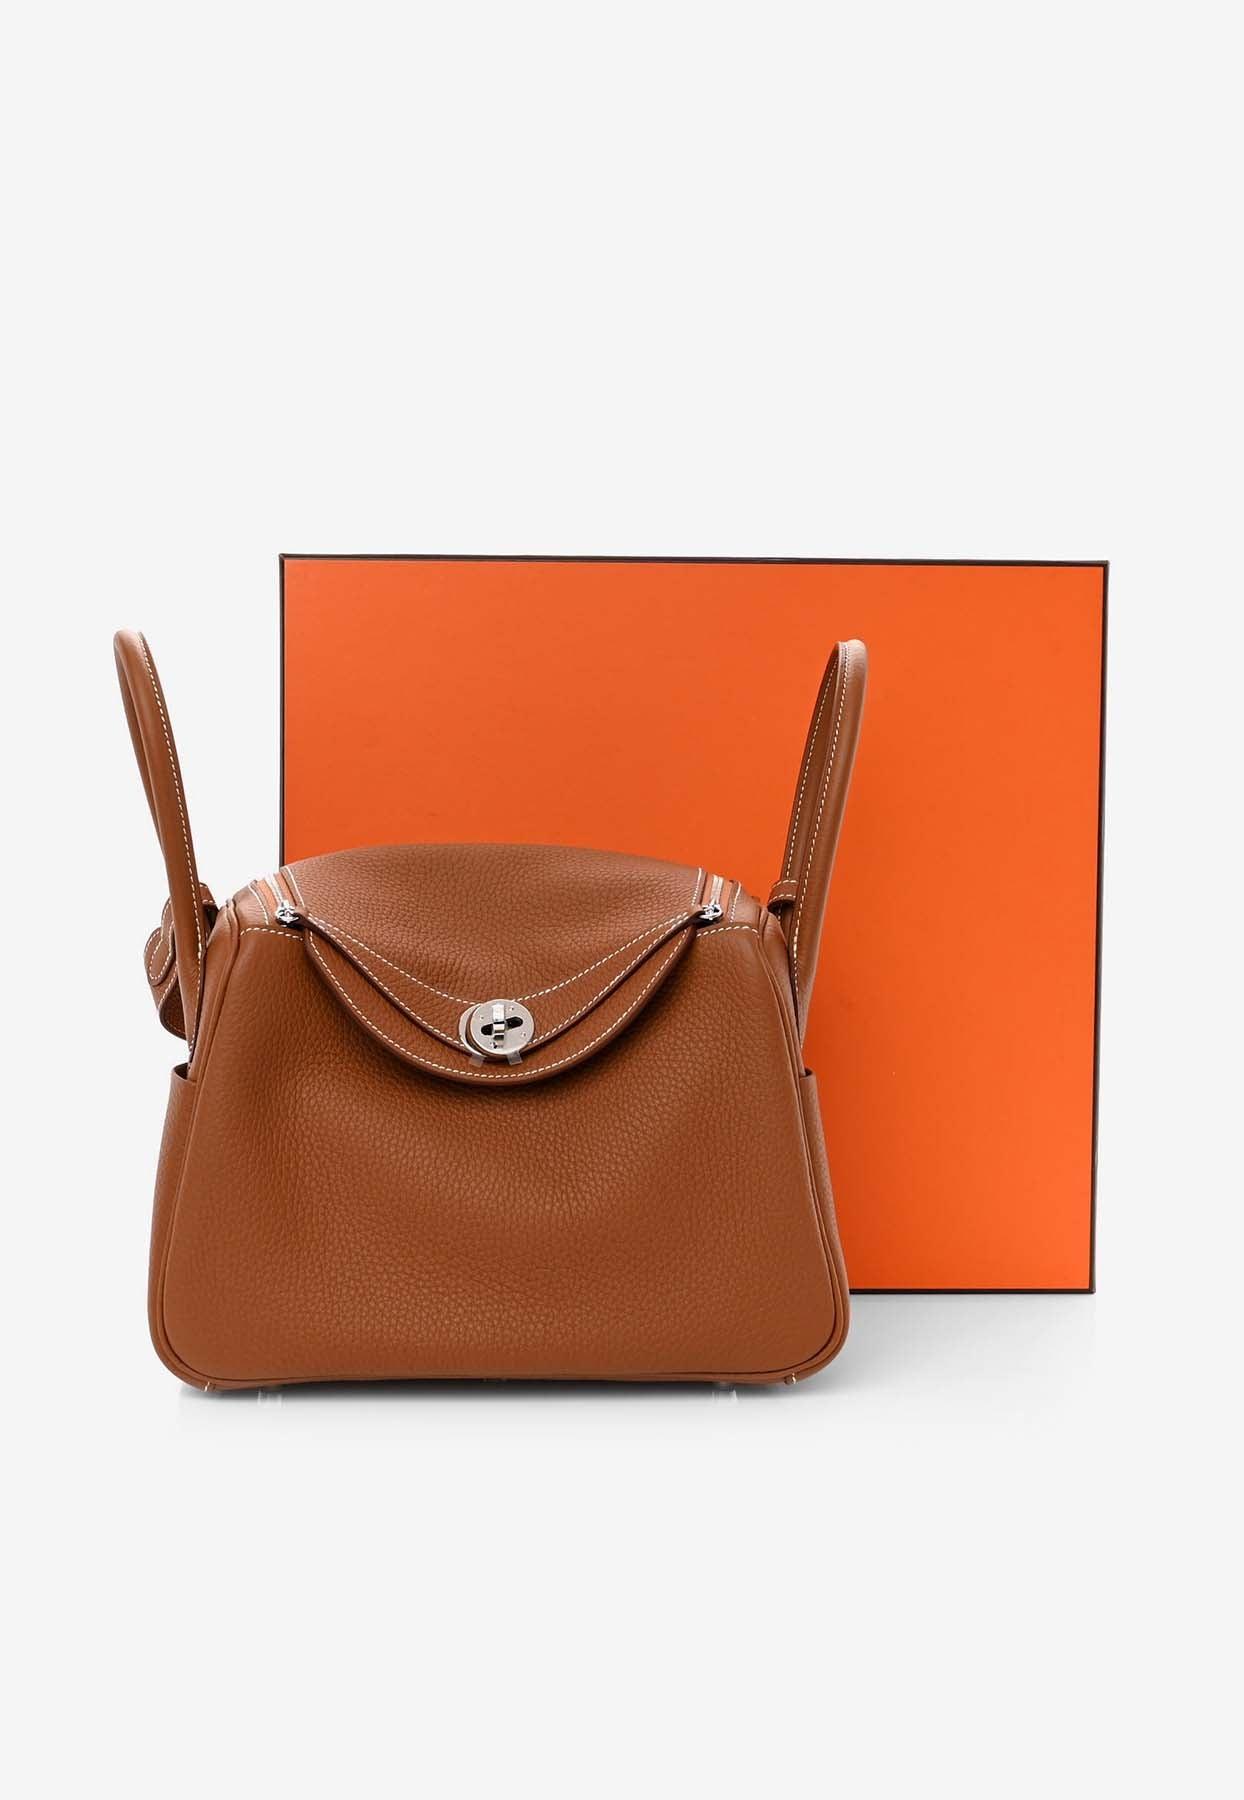 HERMES LINDY 26 GOLD CLEMENCE